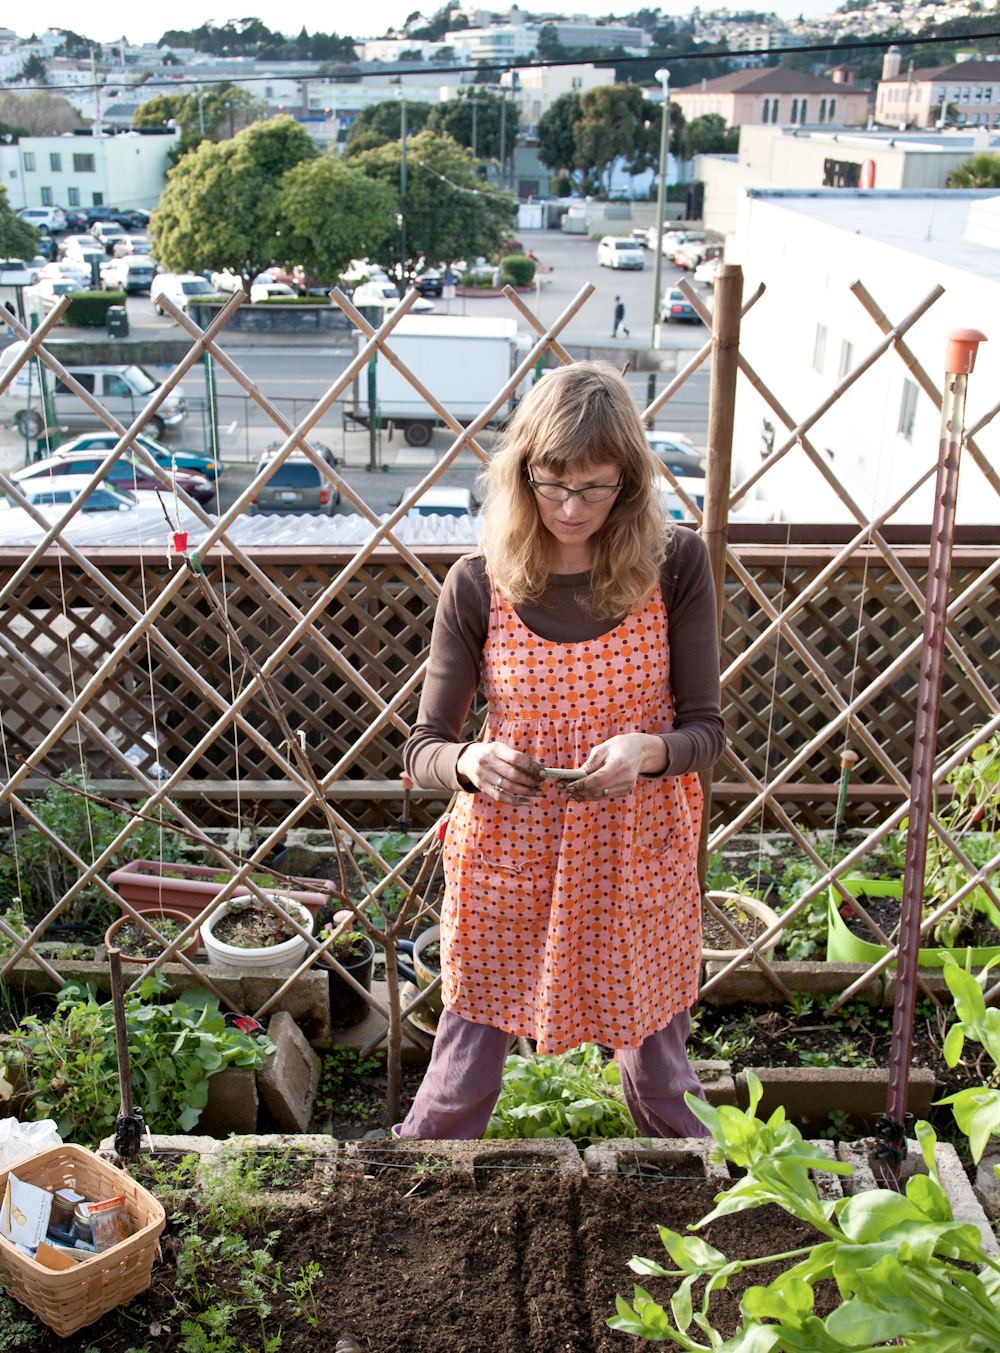 Heidi Kooy tends to produce and livestock in her Excelsior district backyard farm in San Francisco. Photo: Lori Eanes 